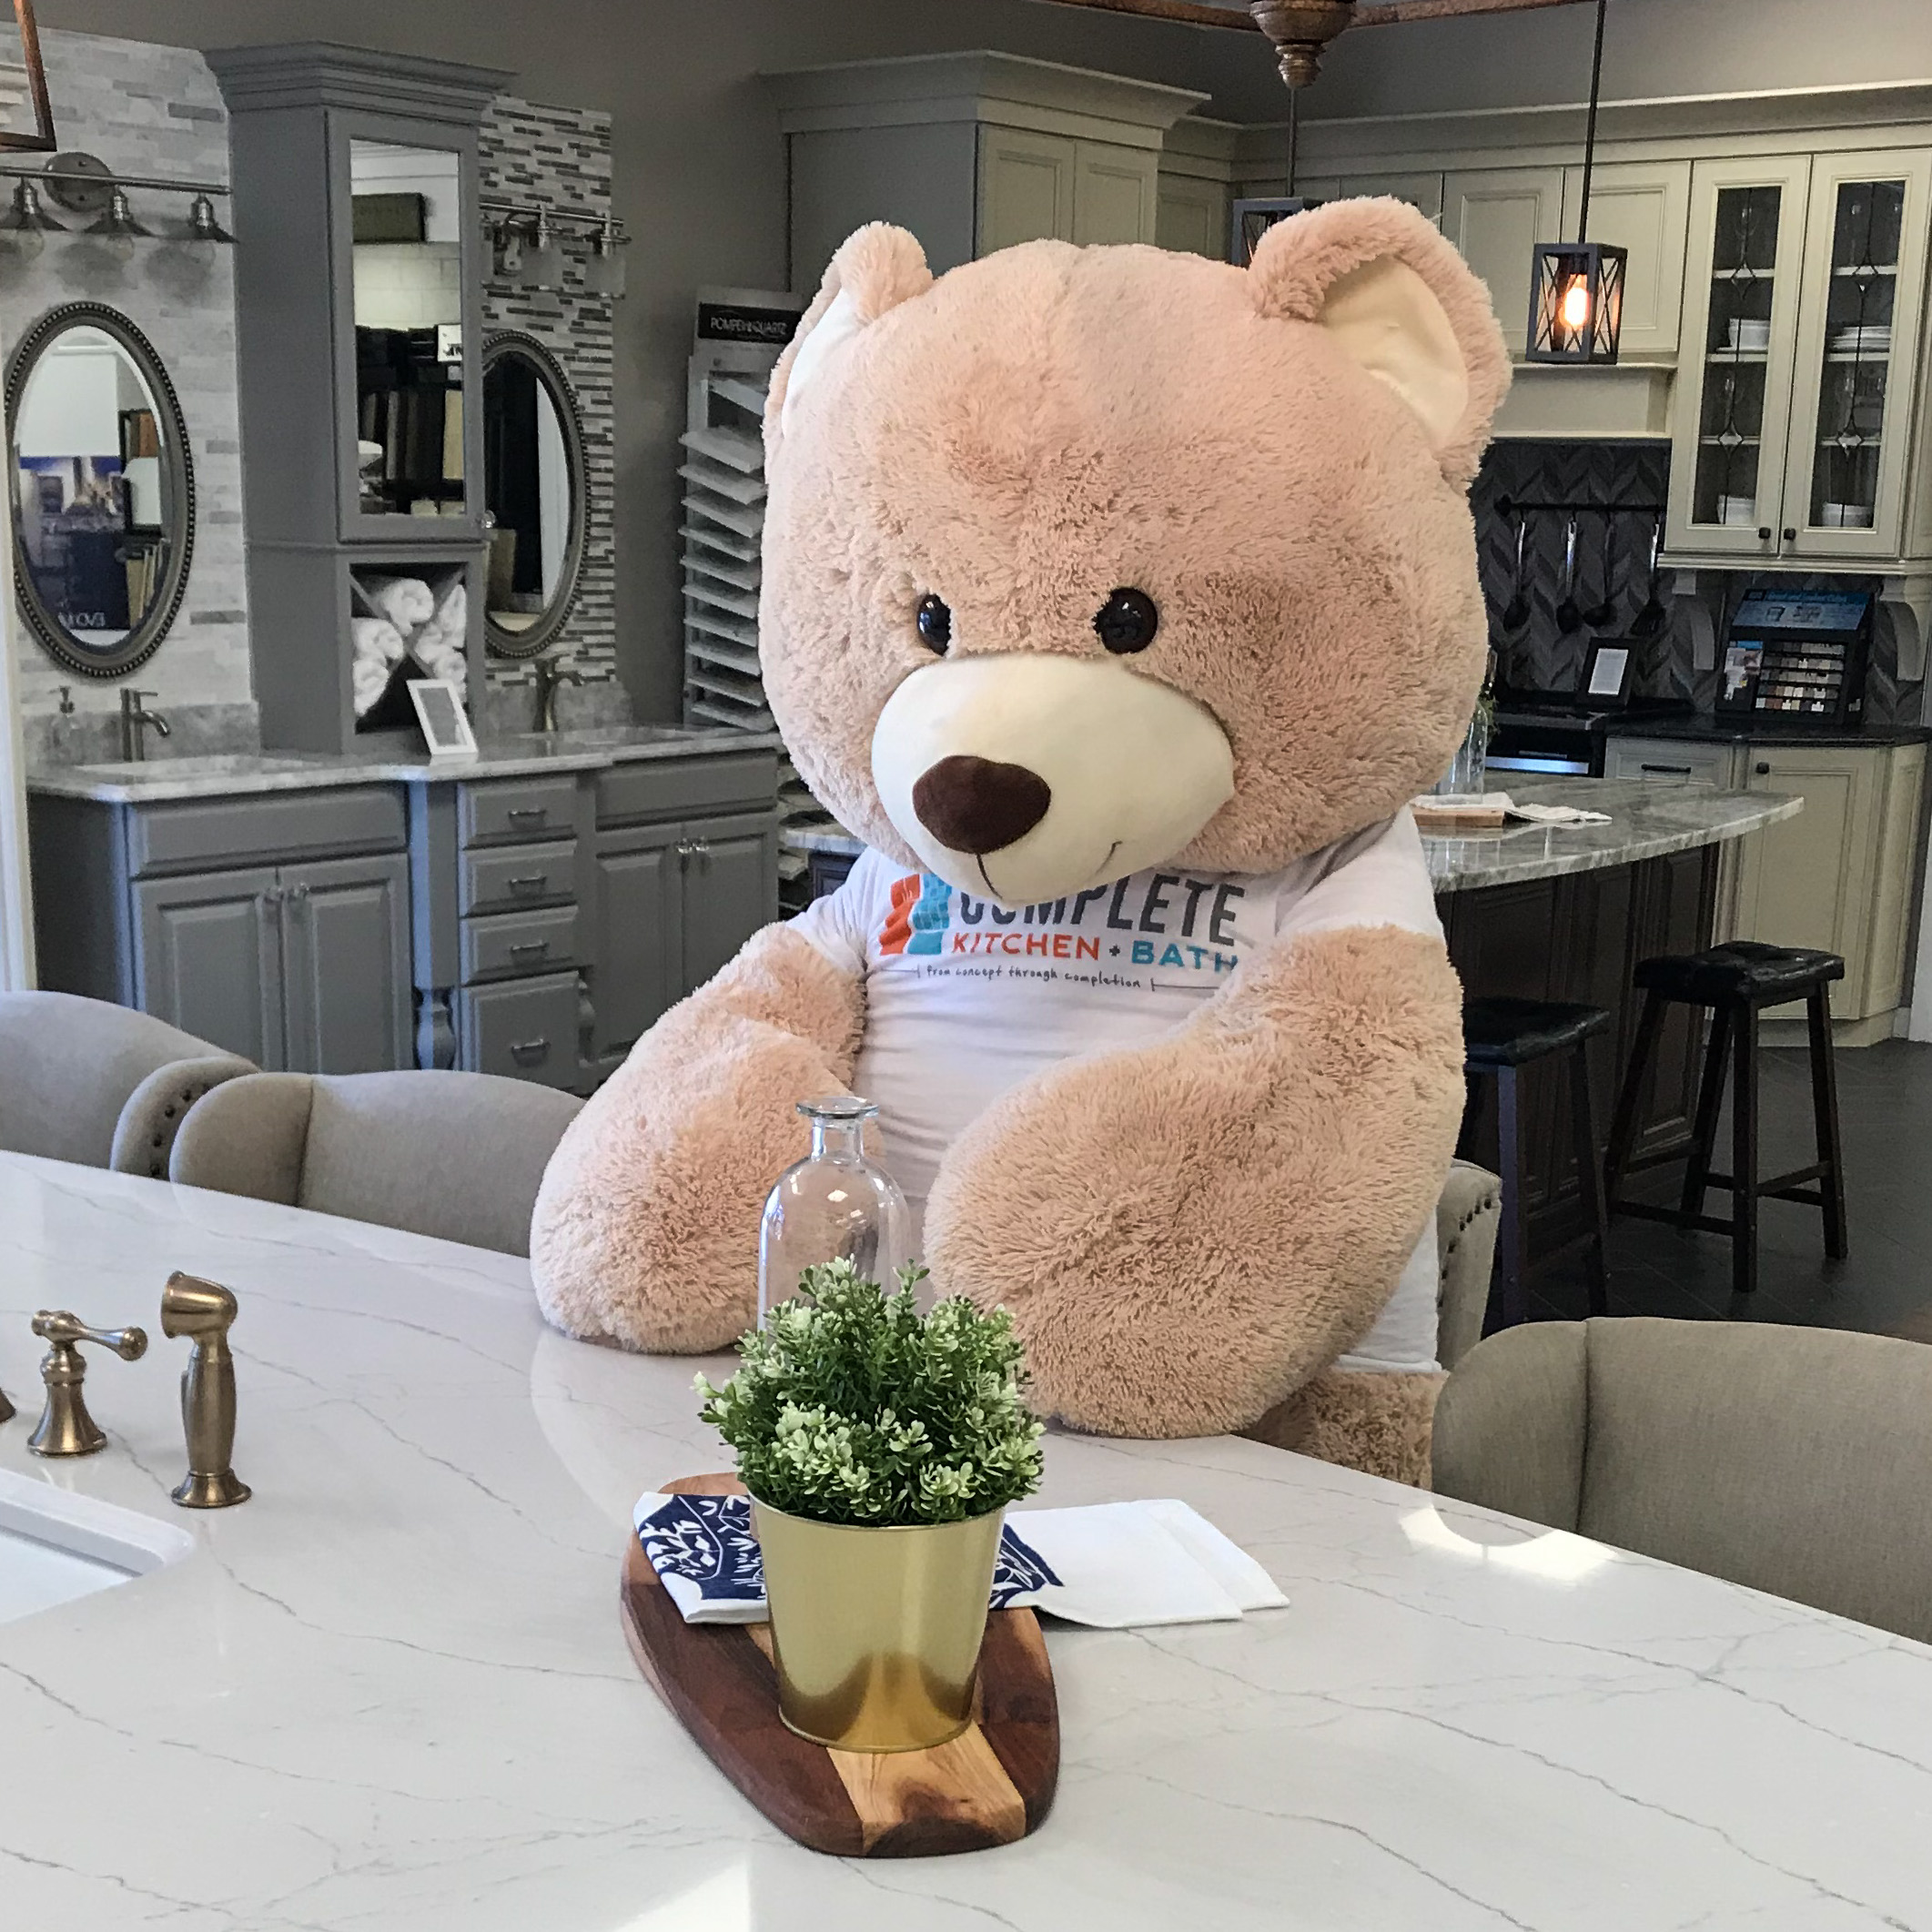 Complete Kitchen and Bath Team Member Bear of Bad News